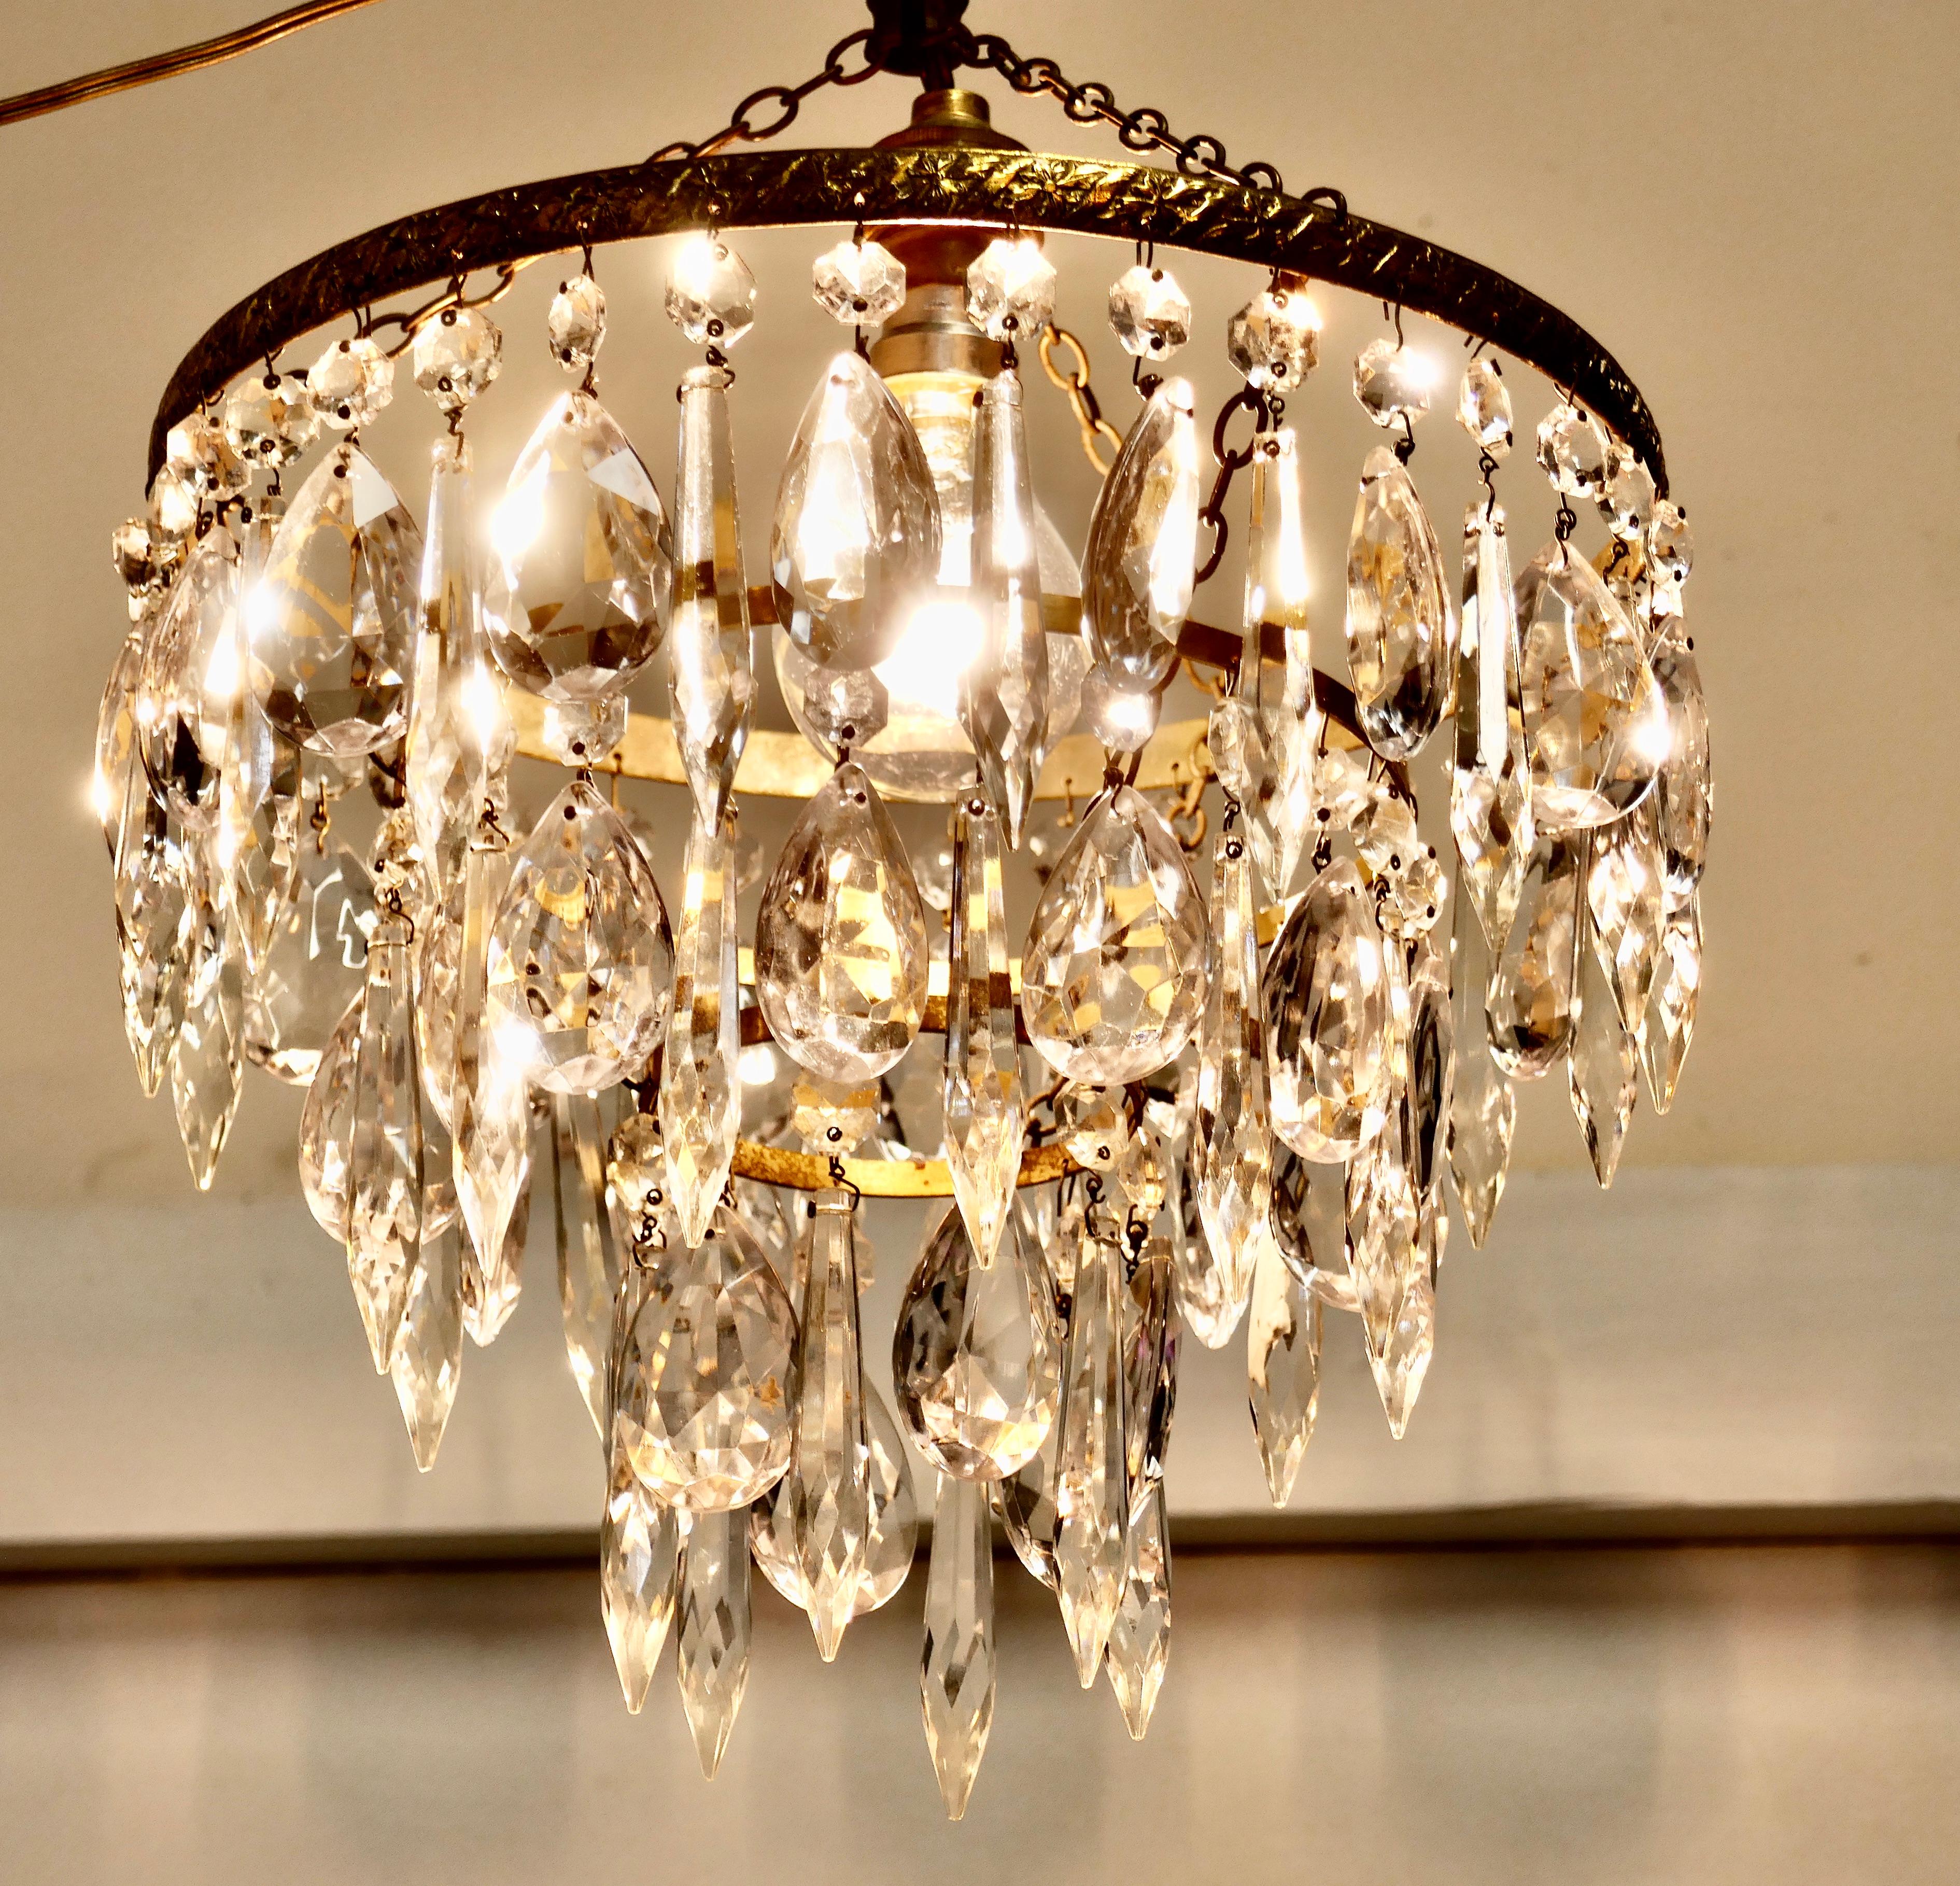 A Charming Waterfall 3 Tier Pendant Chandelier

A Charming waterfall tiered pendant chandelier, this delicate light has three layers of 3 of alternating faceted cut glass pendants with tier drops hanging from a brass frame 

This Dainty Chandelier